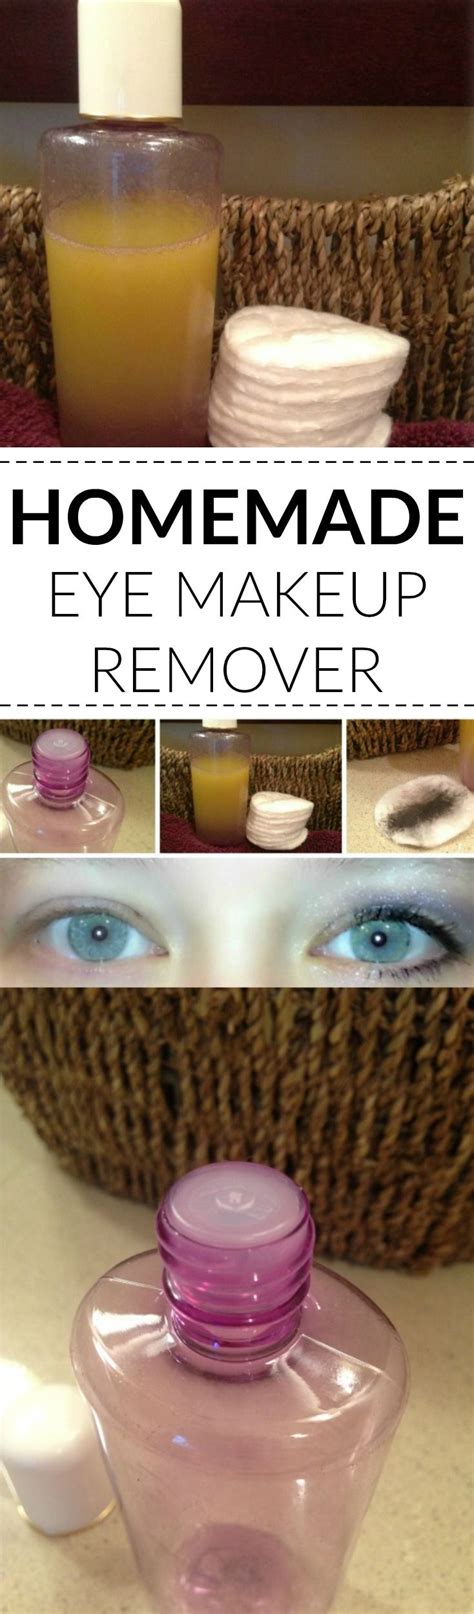 Homemade Eye Makeup Remover With Only 2 Ingredients Costs Just 032